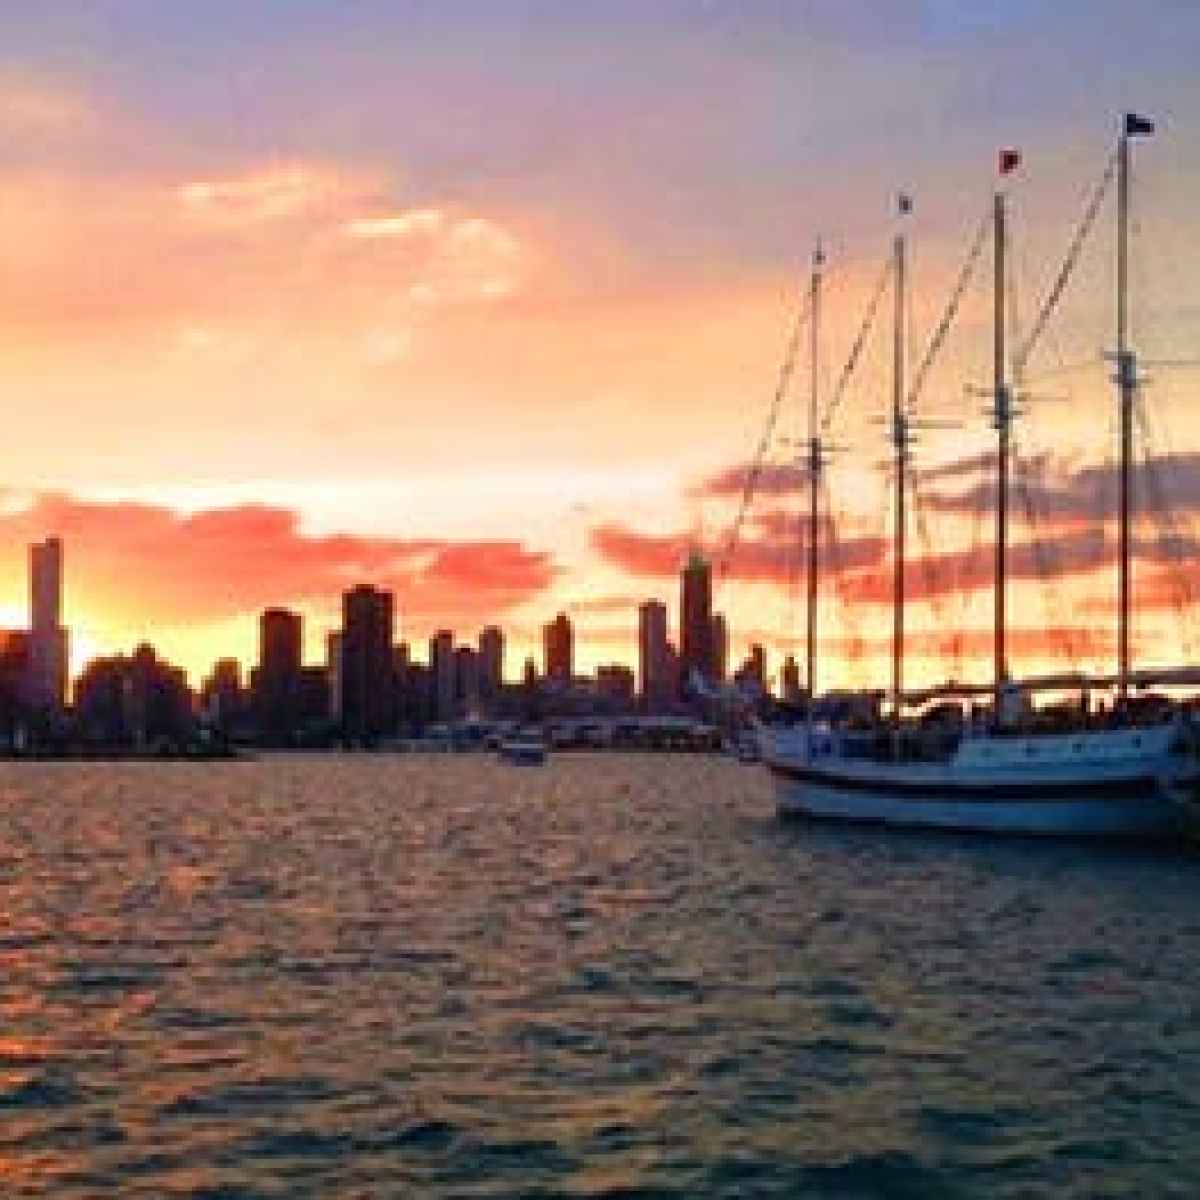 The Tall Ship Windy sailing toward the Chicago skyline at sunset